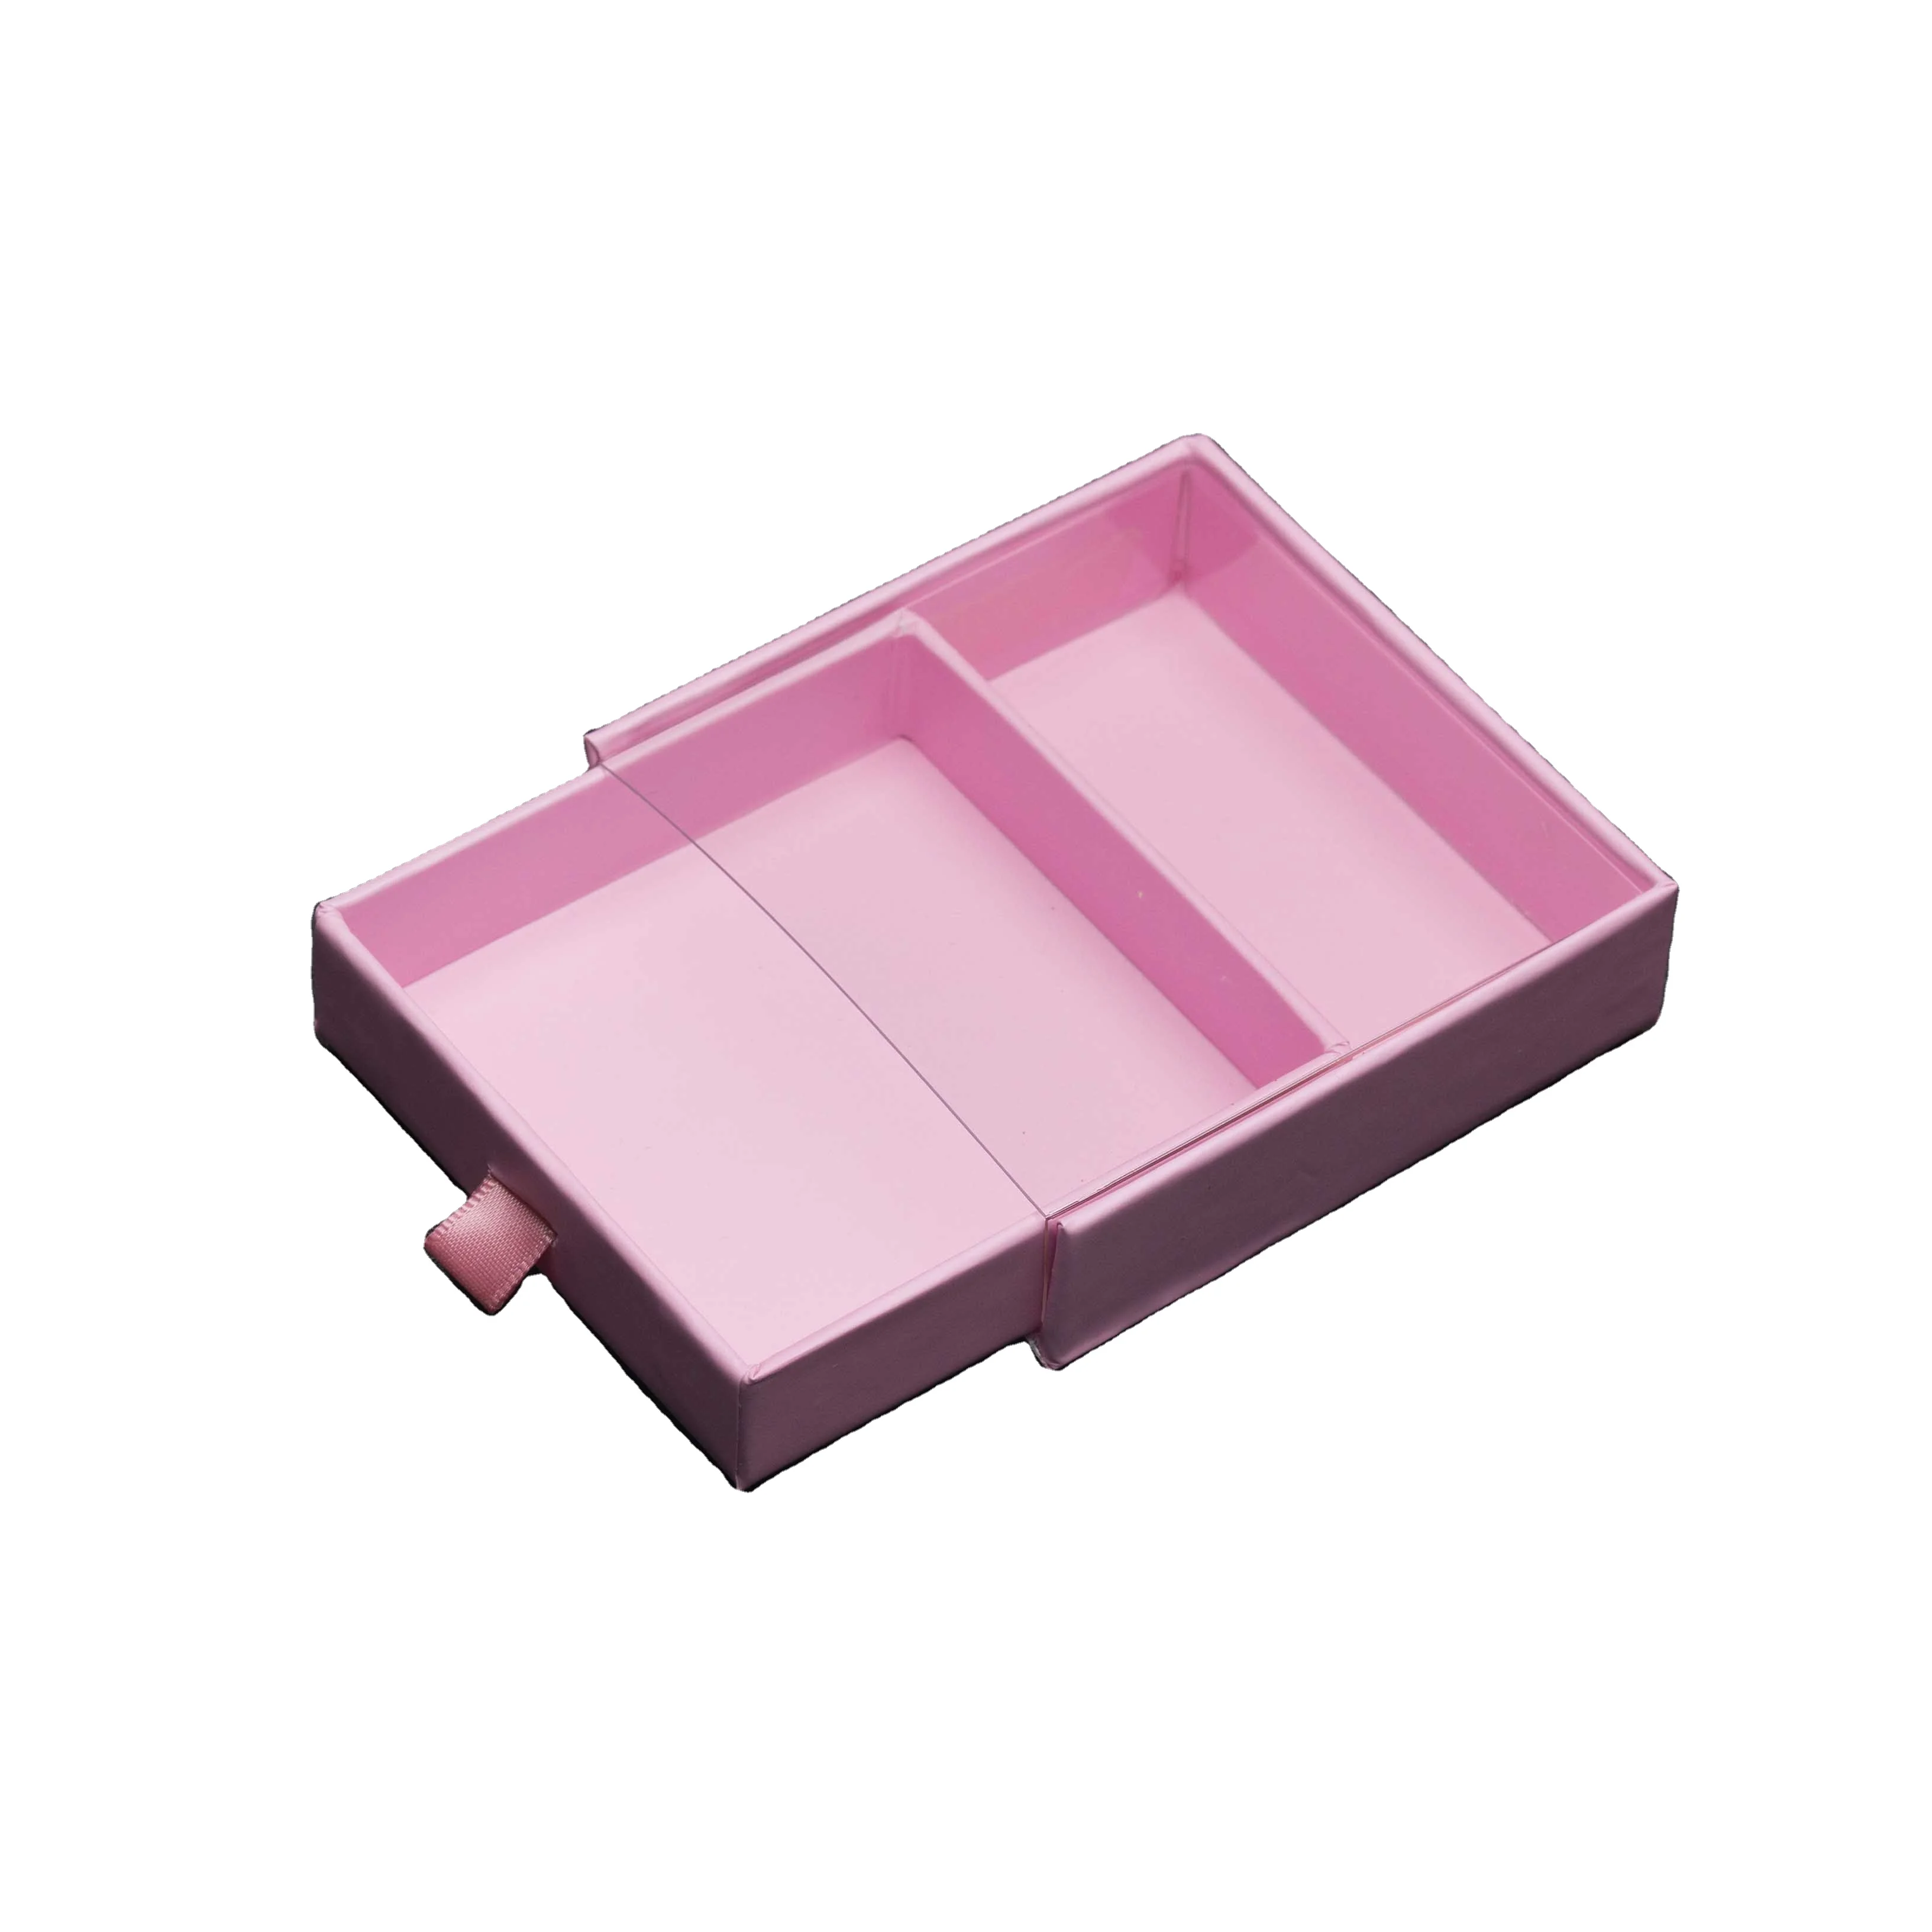 

High-quality square magnetic eyelash packaging box can be customized with exclusive labels